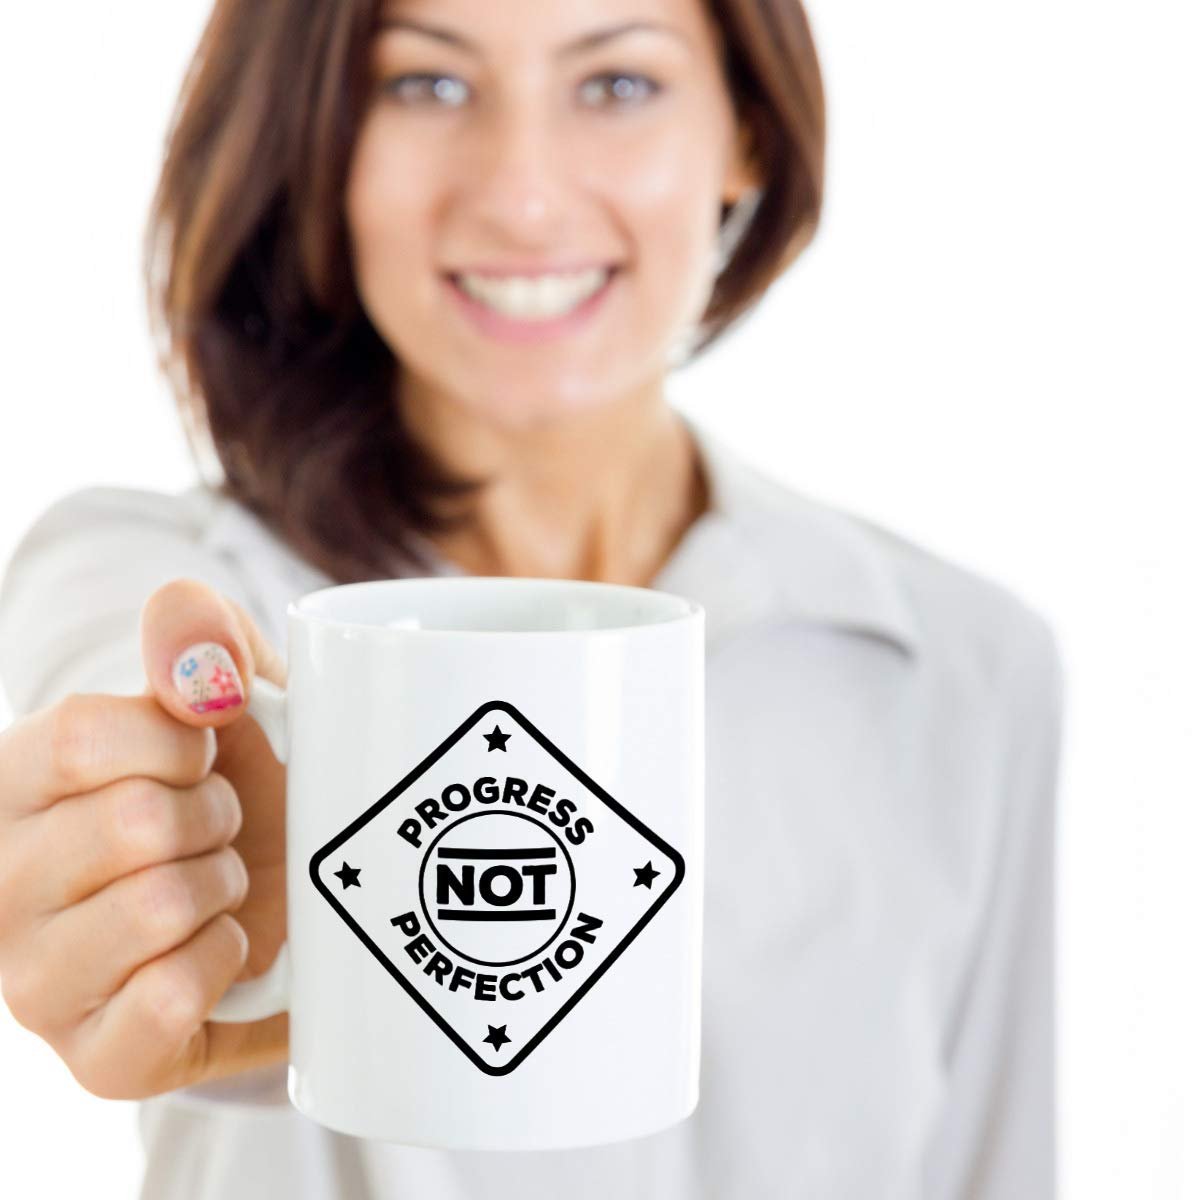 Progress Not Perfection Sobriety Affirmations & Reminder Themed Sign Coffee & Tea Gift Mug, Ornament, Inspiration Décor, Token, Reward & Alcohol, Meth Or Drug Addiction Recovery Gifts For Men & Women - image 2 of 4